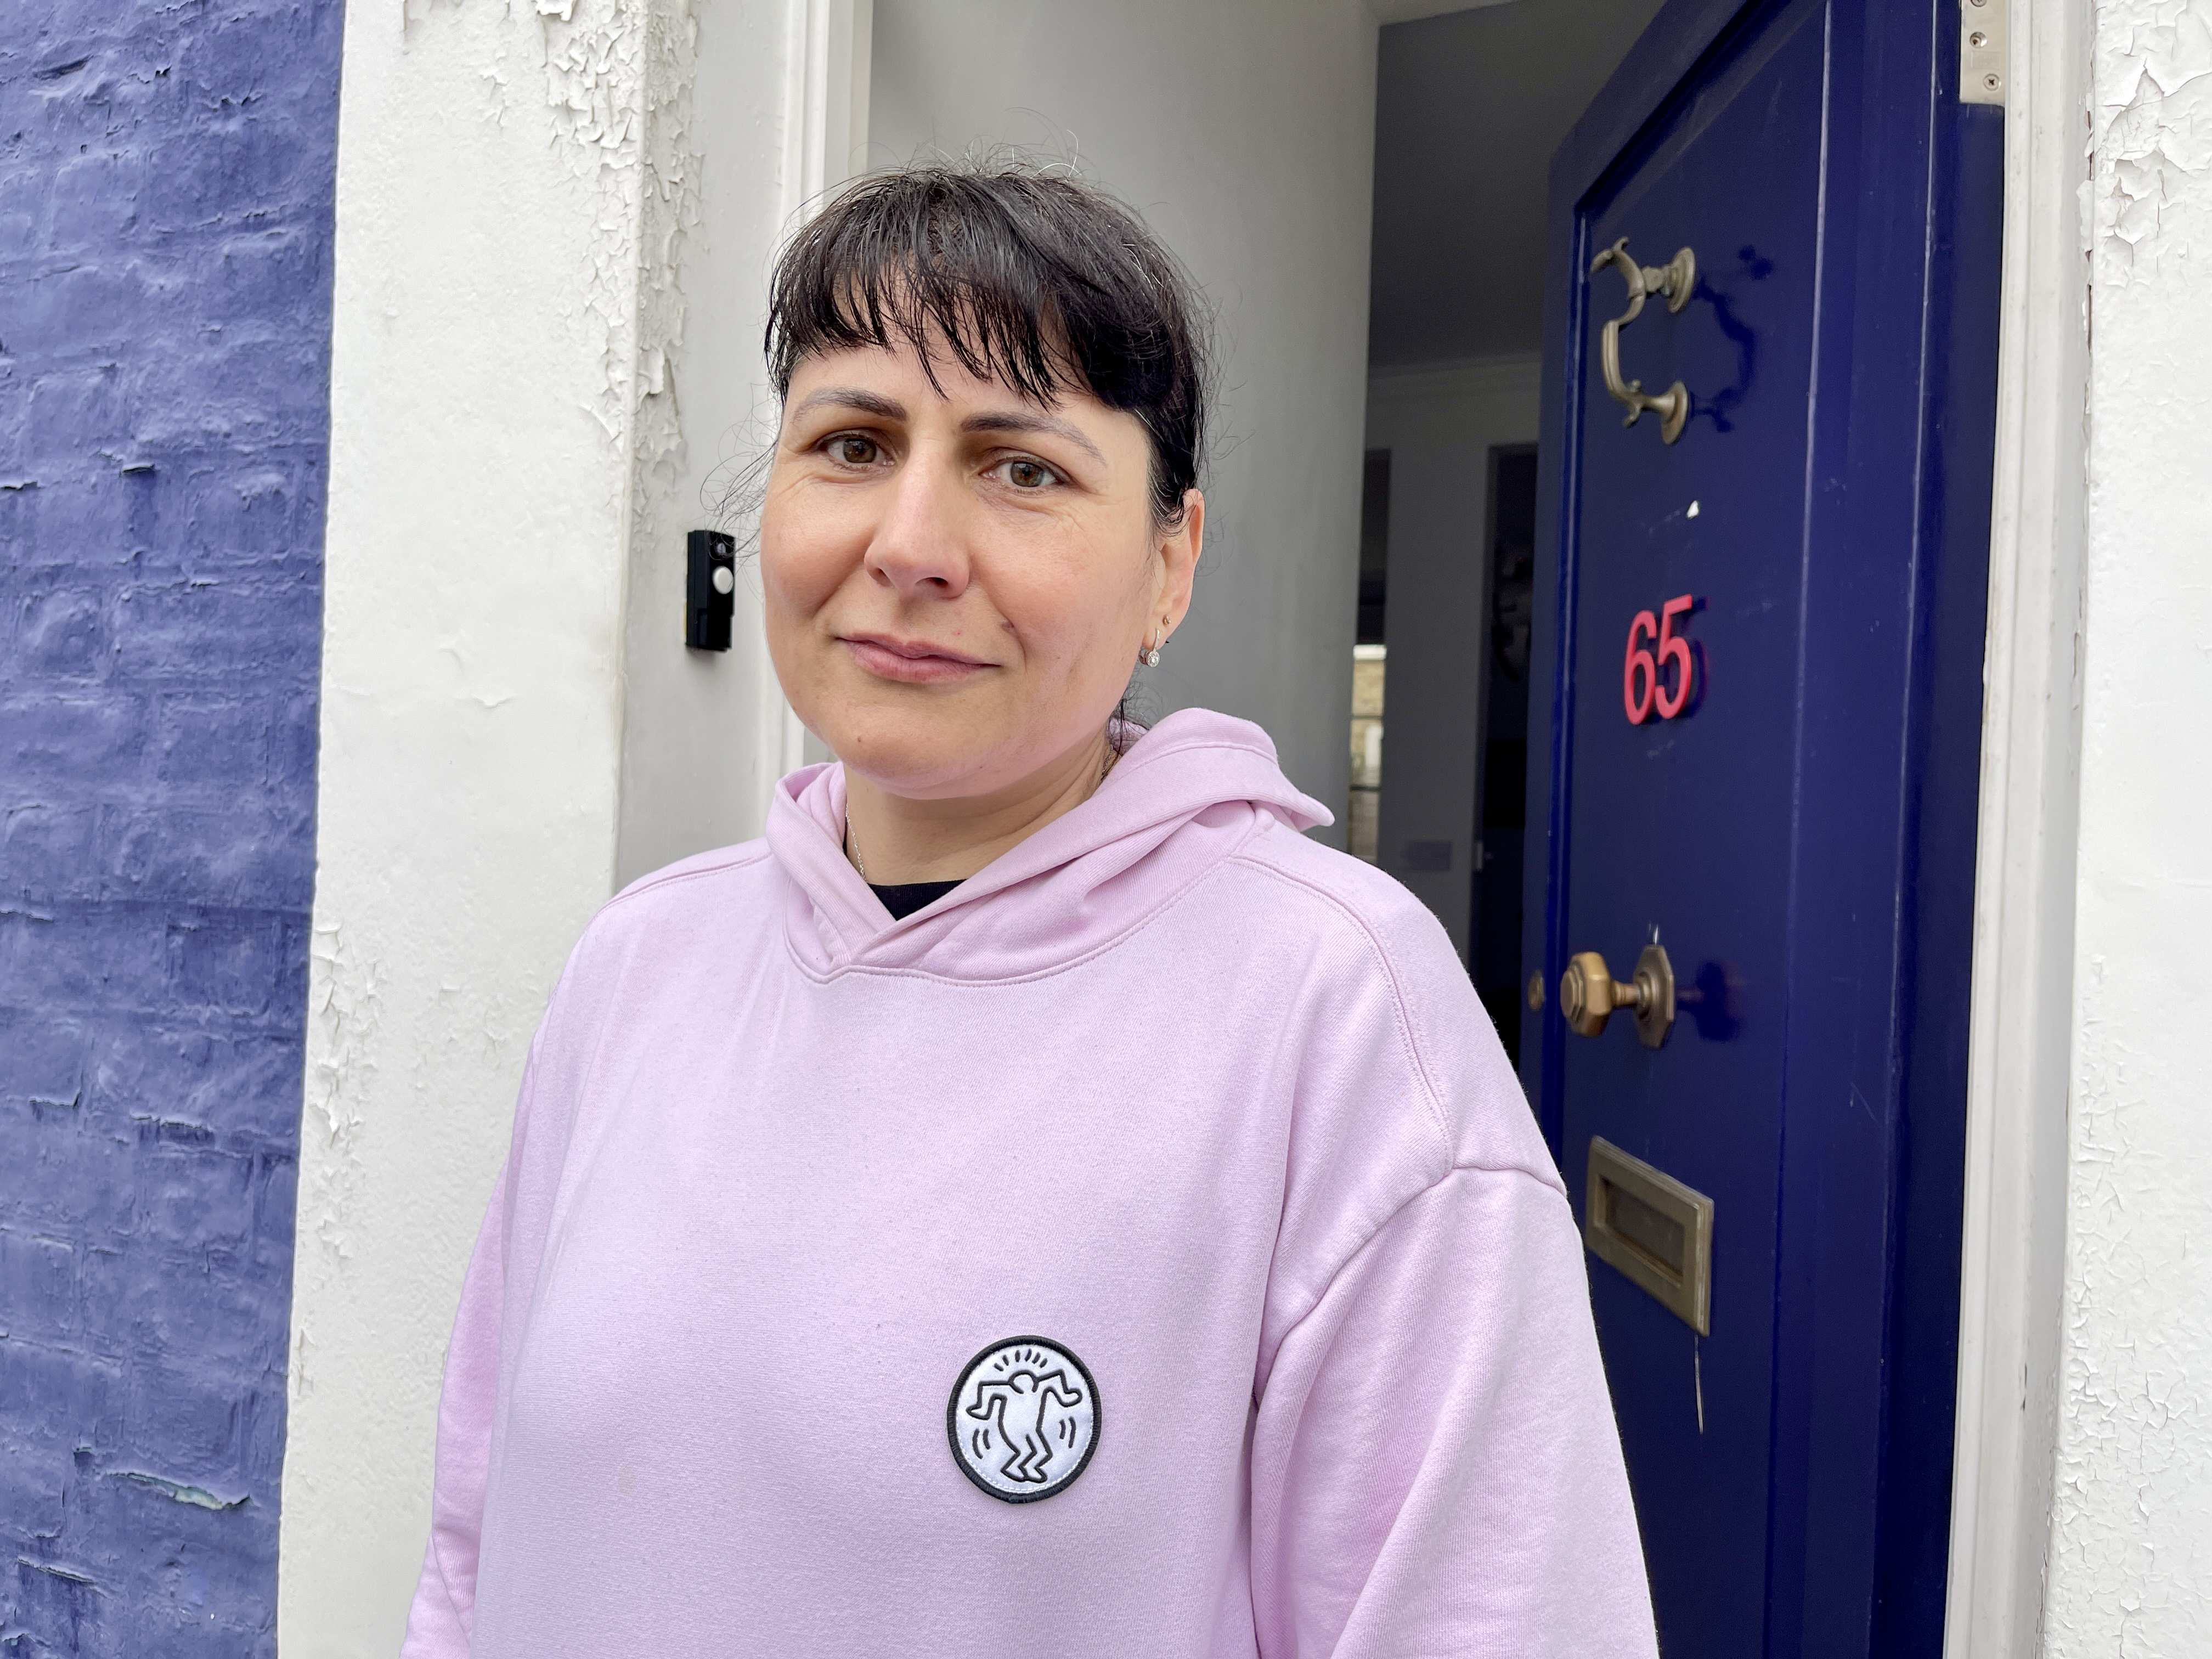 Alex Bonningues, who lives in a purple house, said she once had a tourist shut her door multiple times when she wanted it open